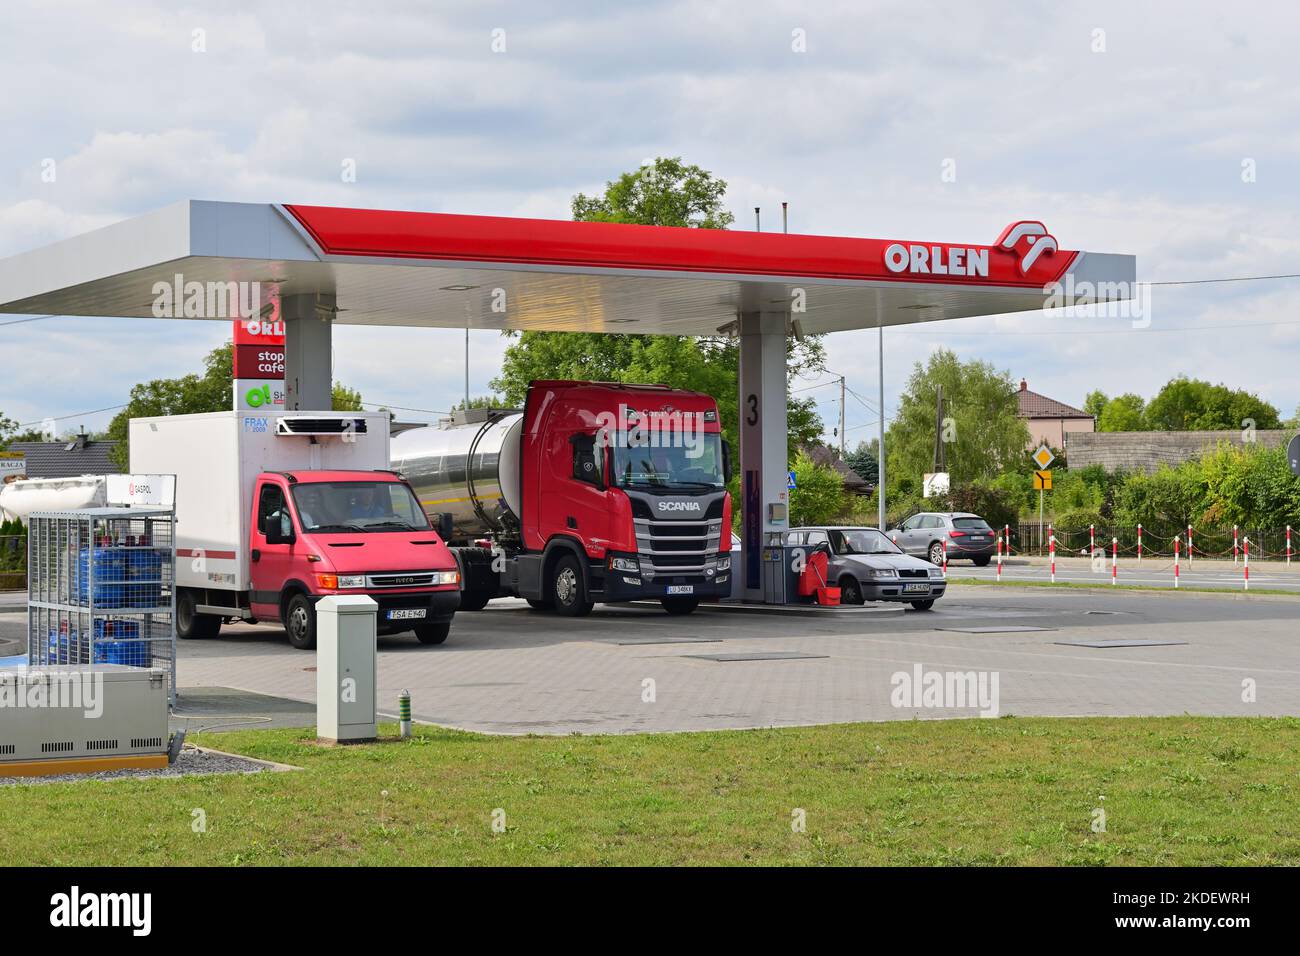 Annopol, Poland - September 13, 2022: Orlen Fuel Station in Annopol. Orlen chain of gas stations is owned by the Polish oil concern PKN ORLEN, one of Stock Photo